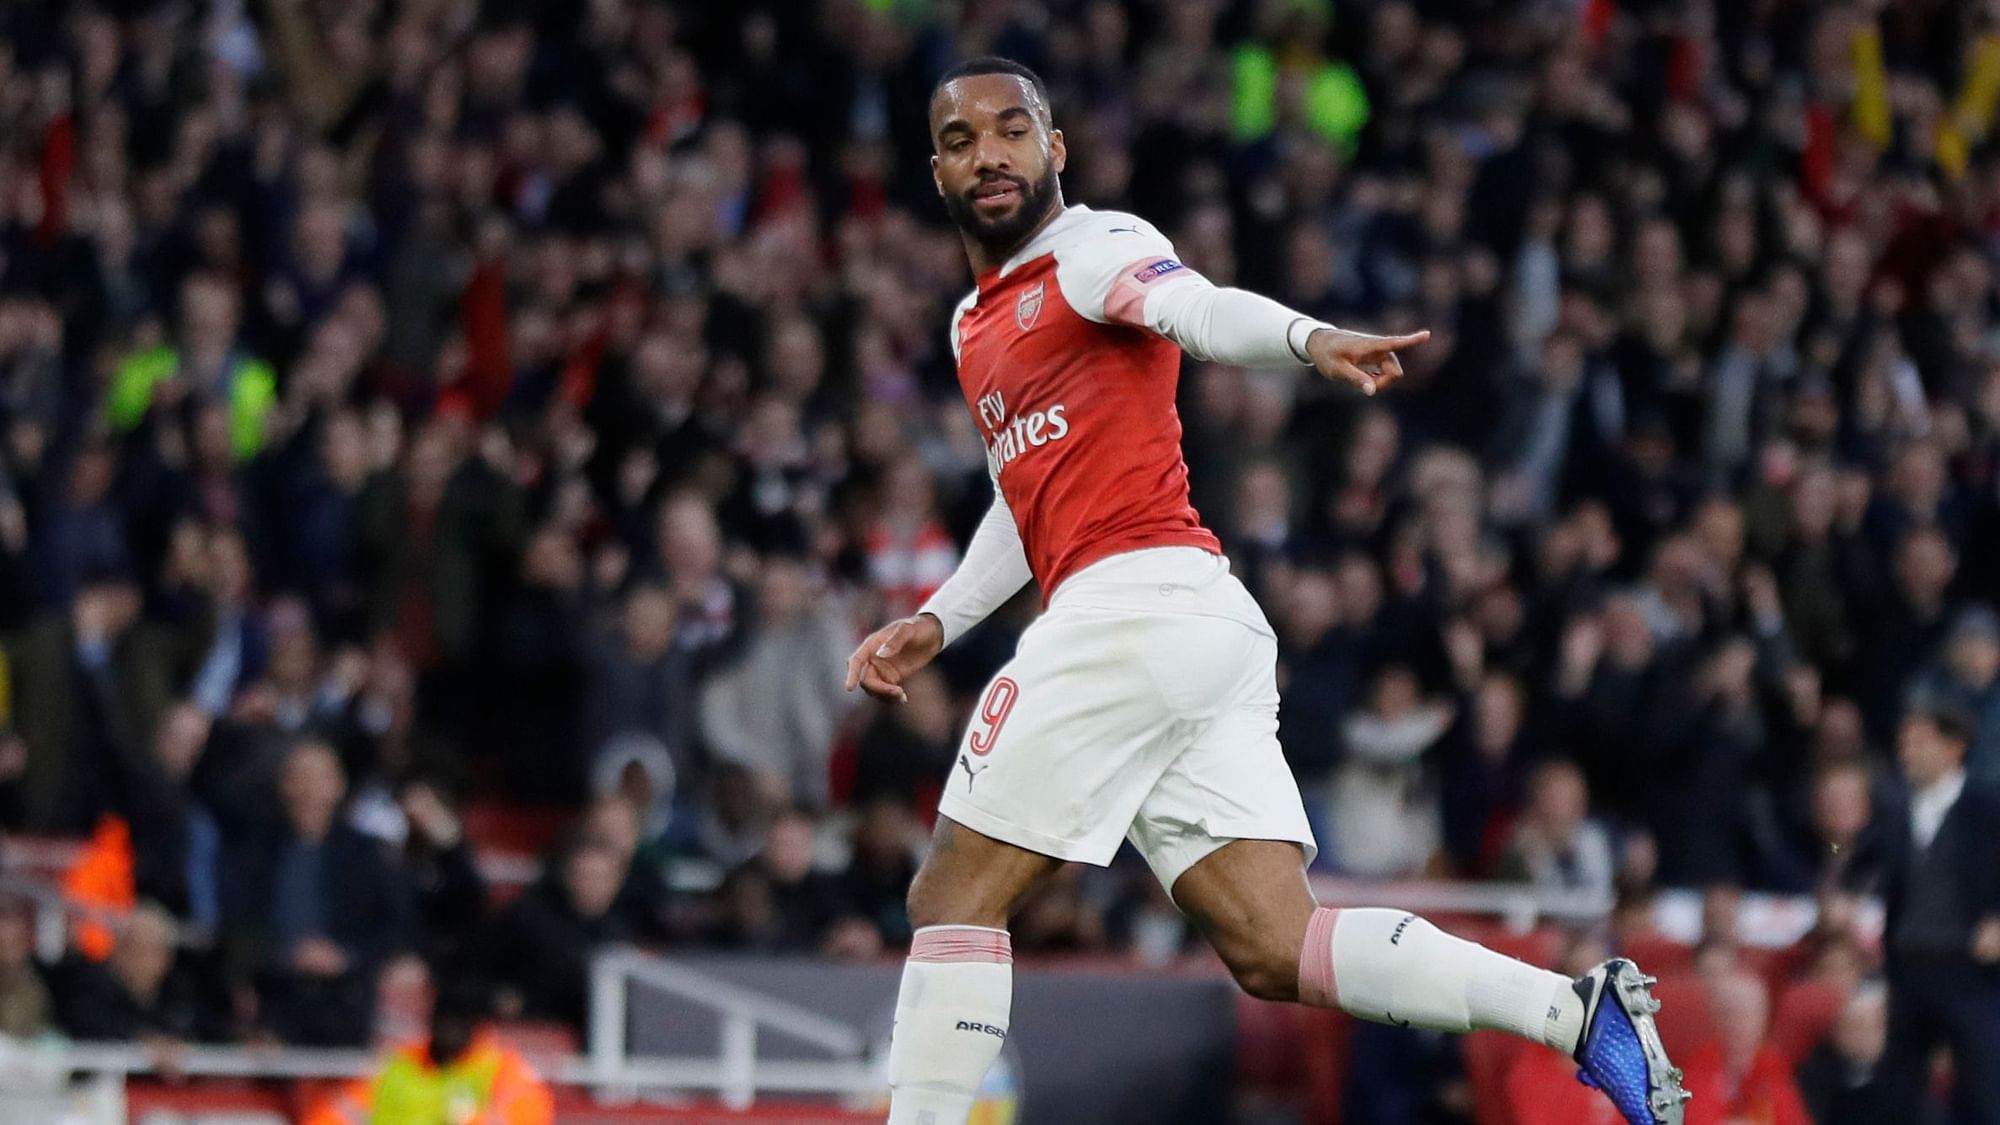 Arsenal’s Alexandre Lacazette celebrates after scoring his first goal.